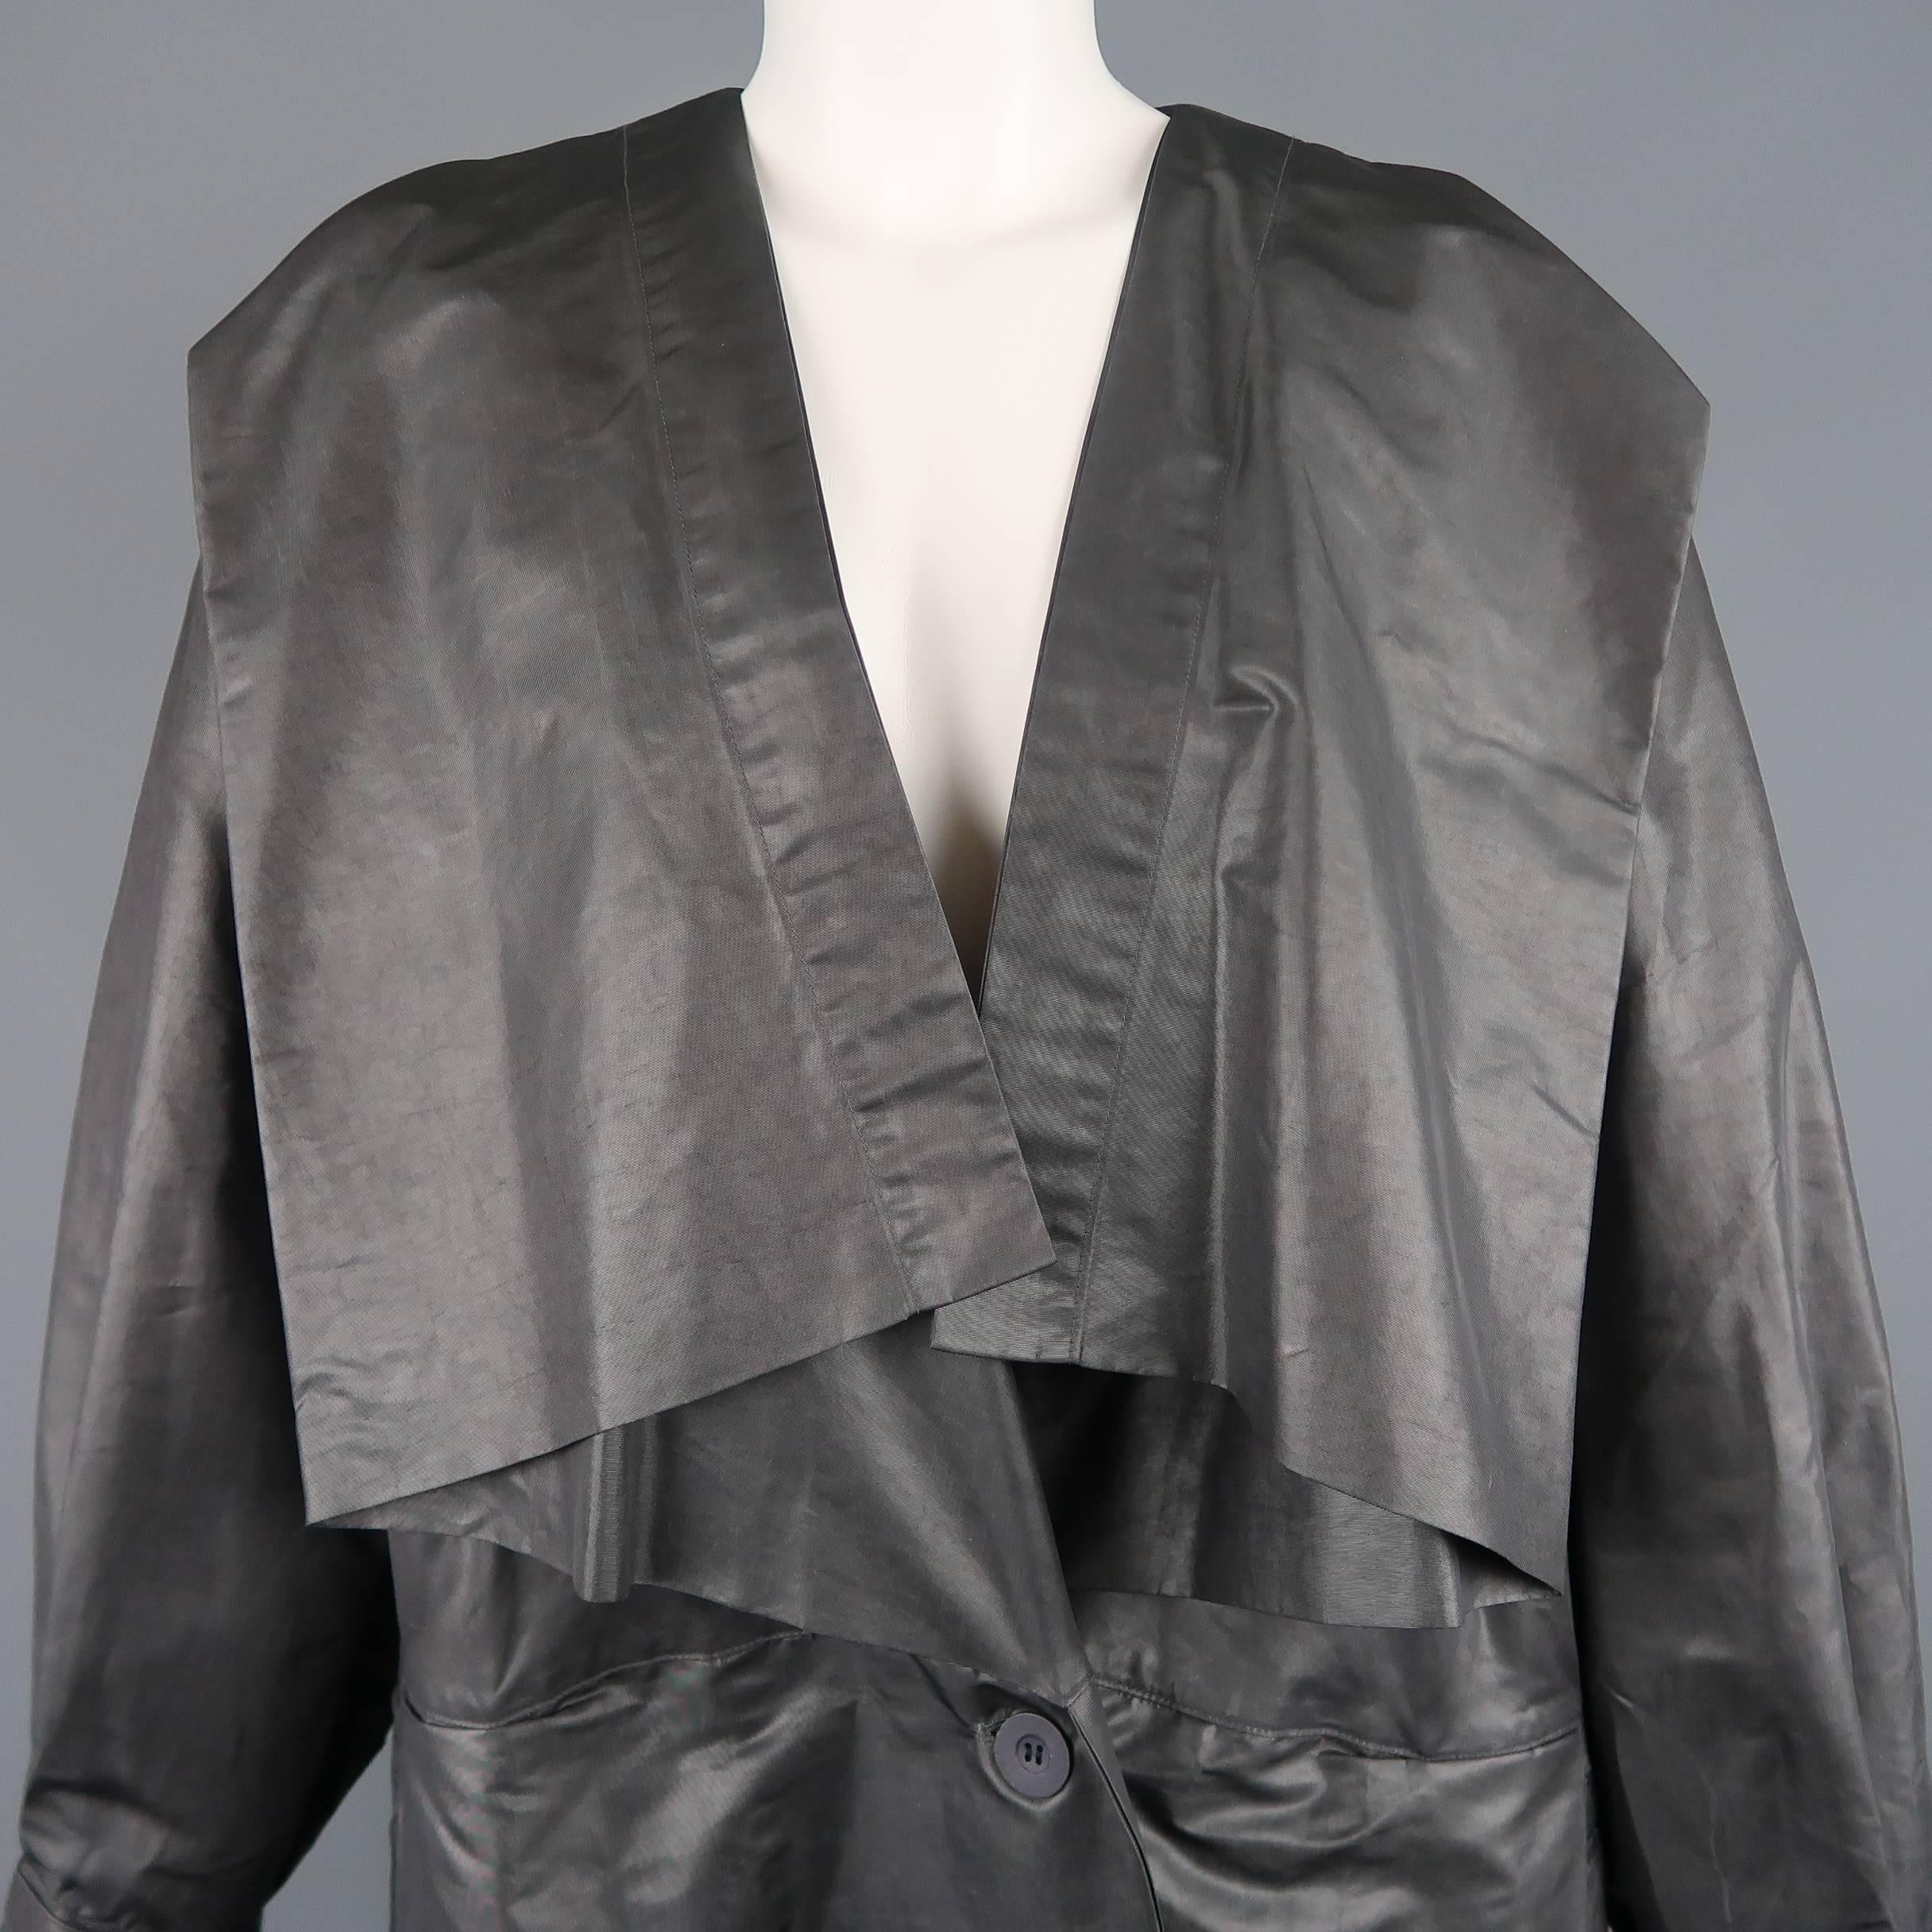 Vintage 1980's ISSEY MIYAKE coat comes in metallic polyester twill with a folded drape square collar, pleated front, slanted pockets, and sailor collar back. Without belt. As-is.  Made in Japan.
 
Good Pre-Owned Condition.
Marked: S
 
Measurements:
